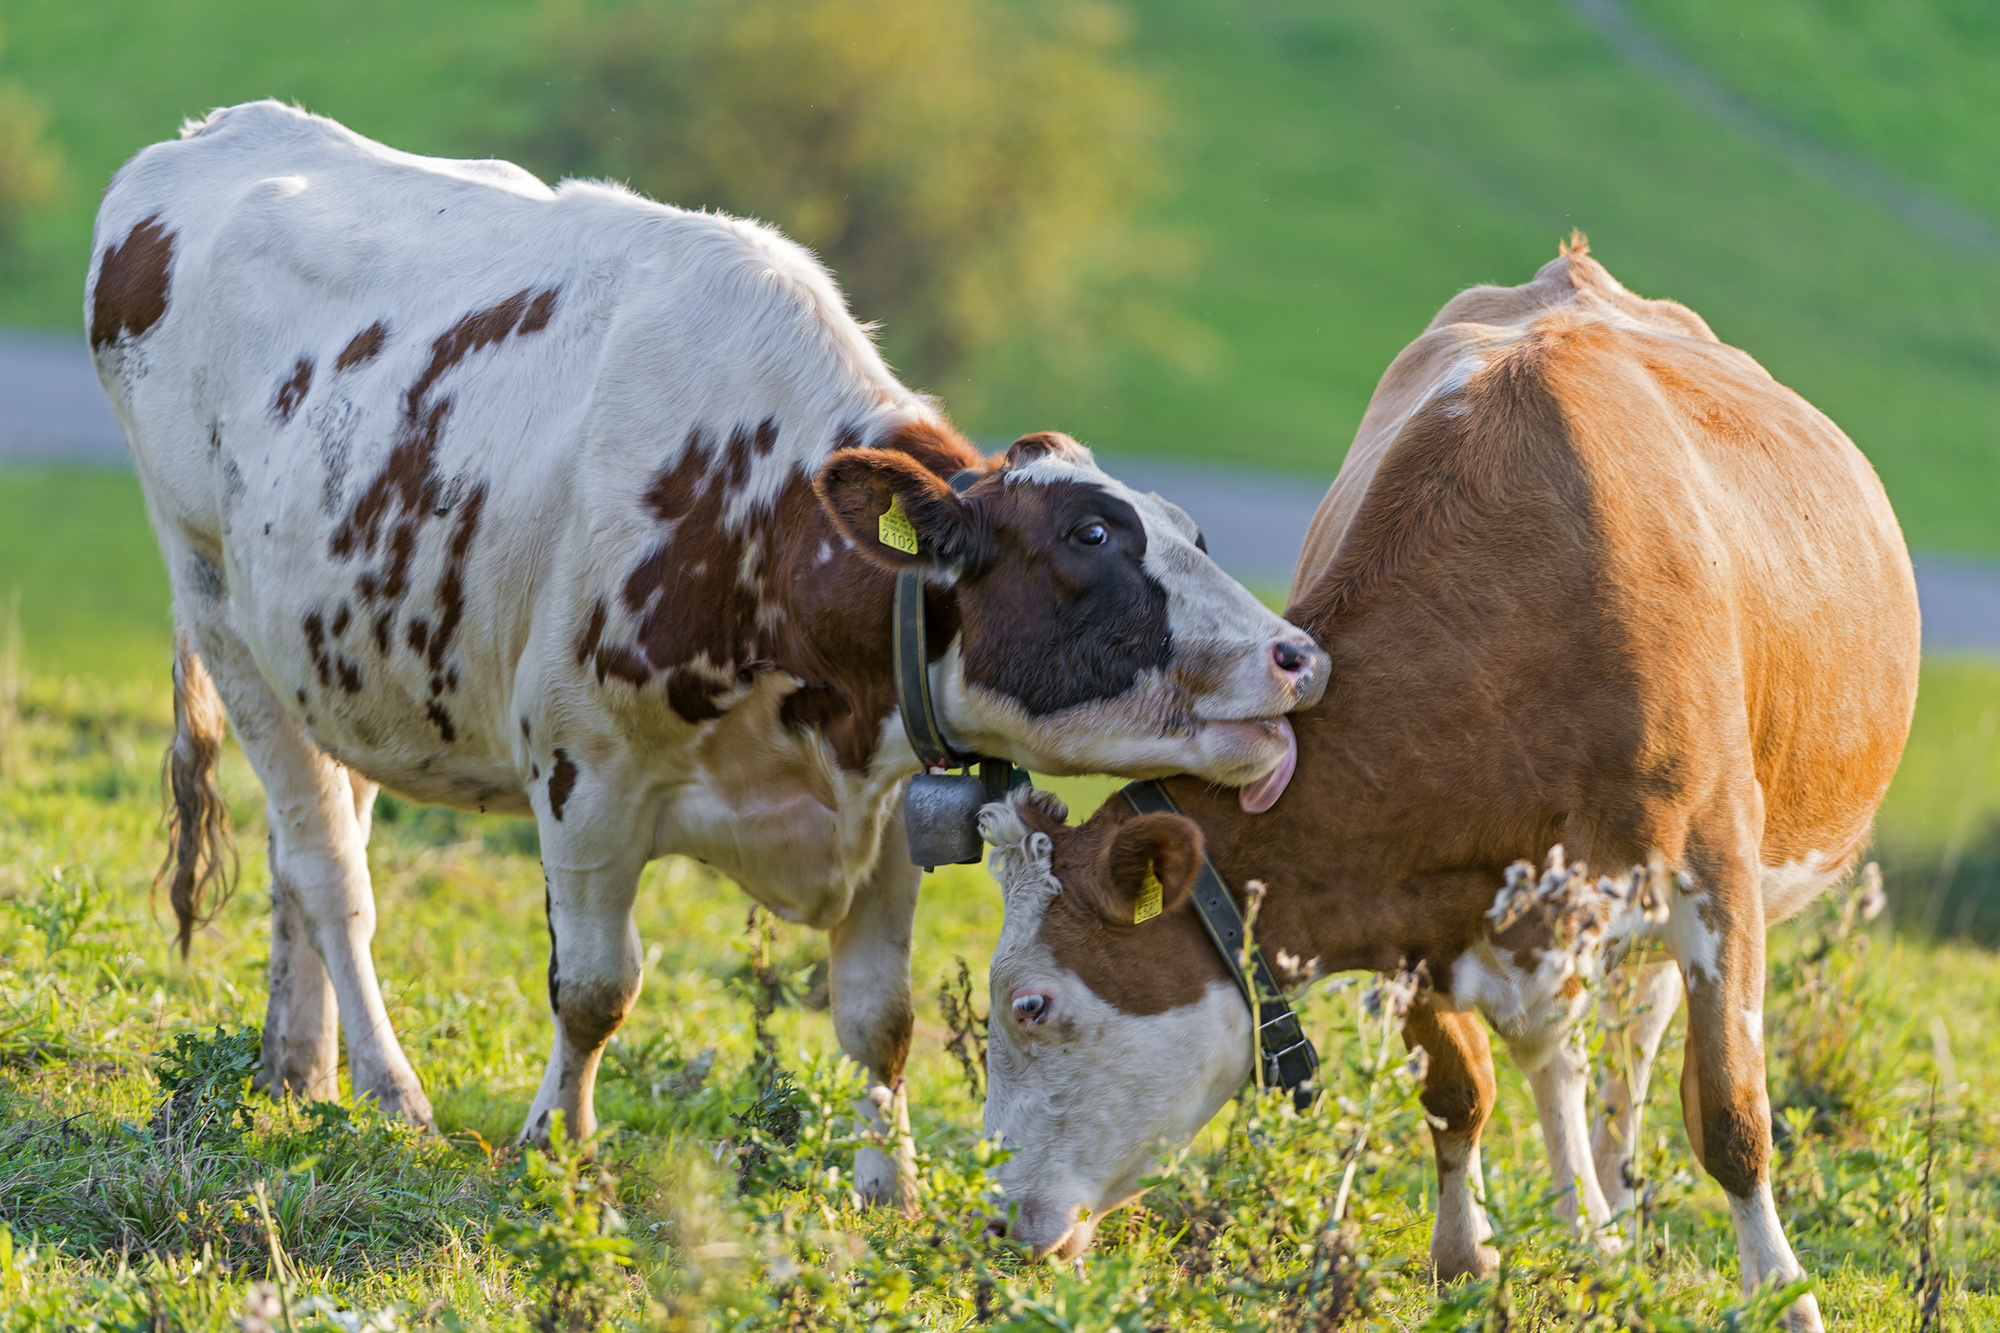 Cows are considered highly sociable animals and suffer from stress when separated from their best friends (yes, they have best friends!). These two are grooming each another!